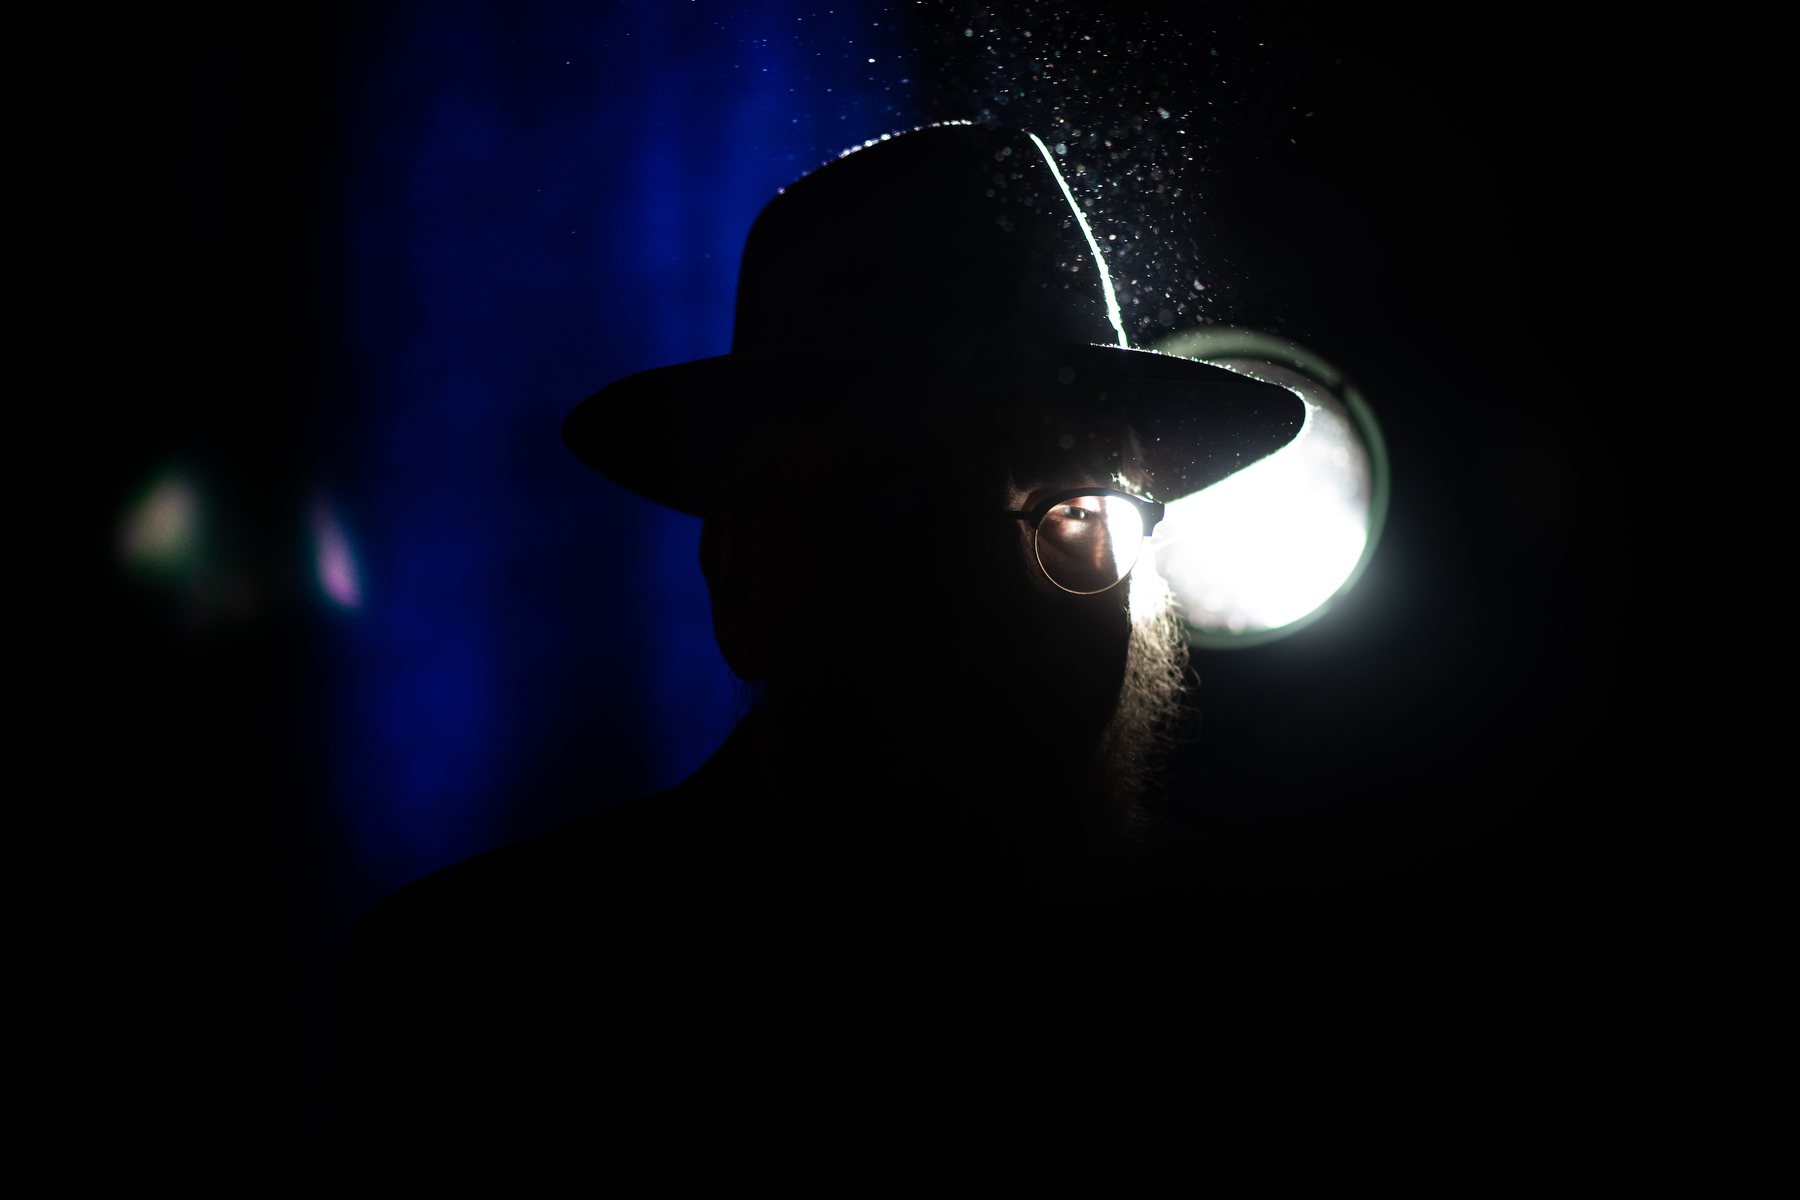  A Chabad-Lubavitch rabbi is silhouetted against a stage light at the end of a banquet in Suffern, NY. Each year, the International Conference of Chabad-Lubavitch Shluchim, or emissaries, takes place in the New York City area for six days. 